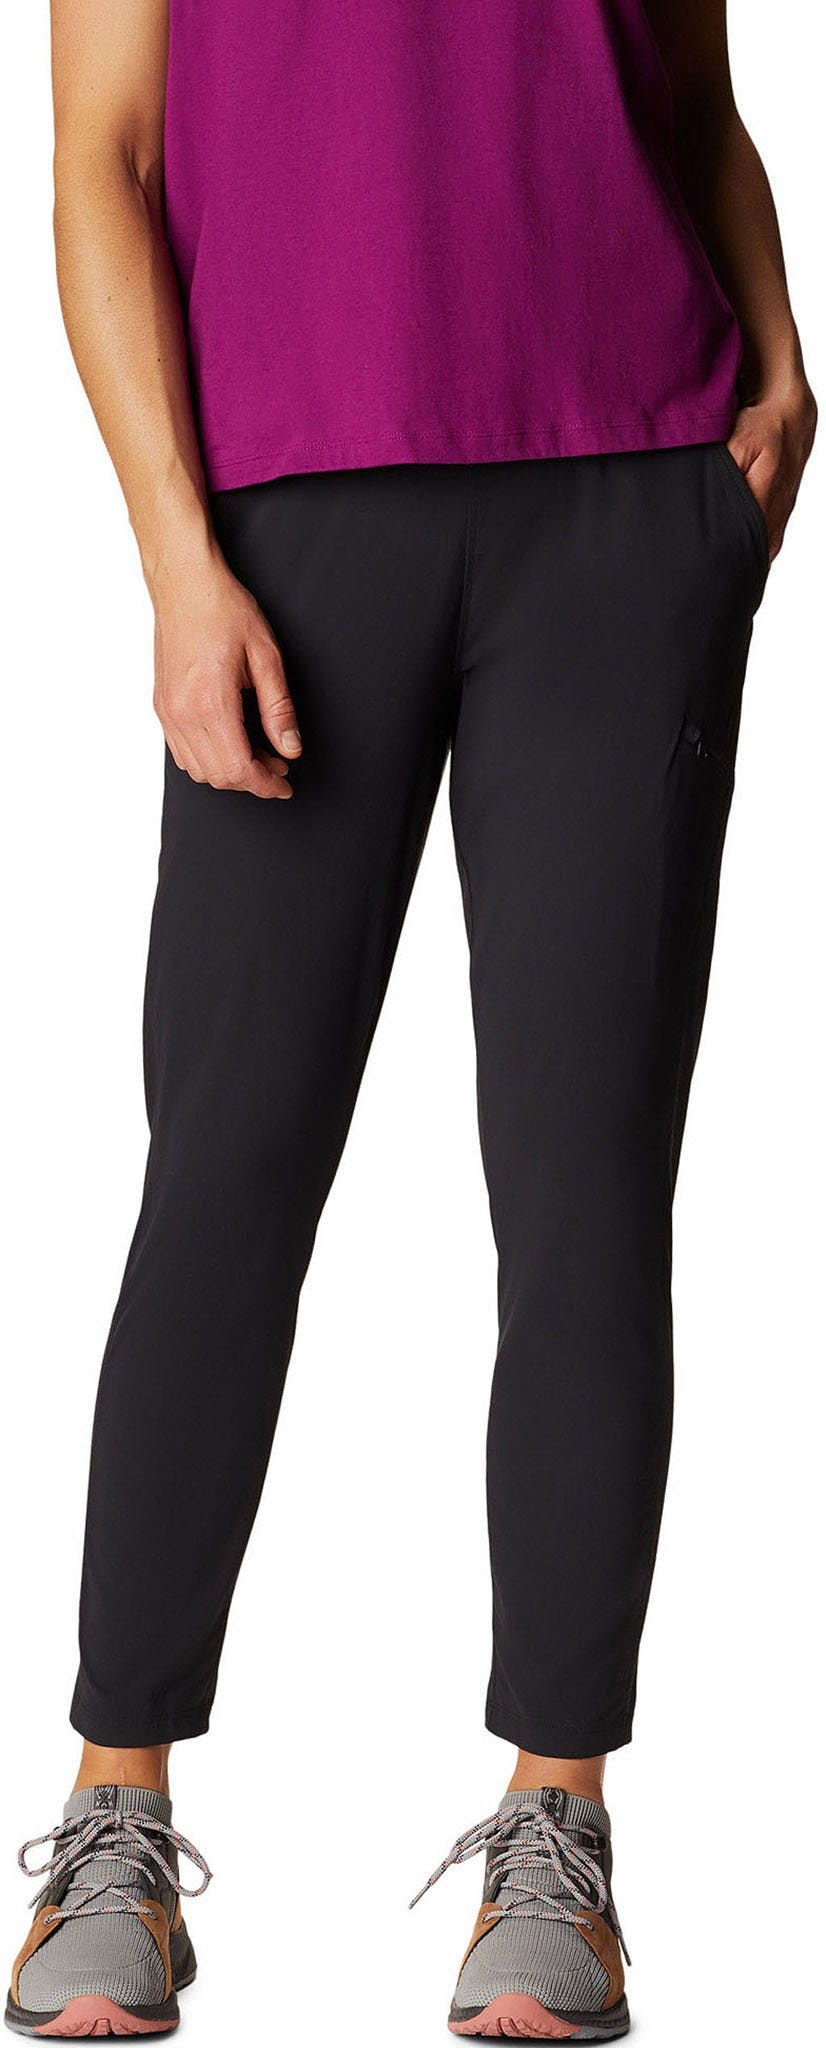 Product image for Dynama 2 Ankle Pant Big Size - Women's